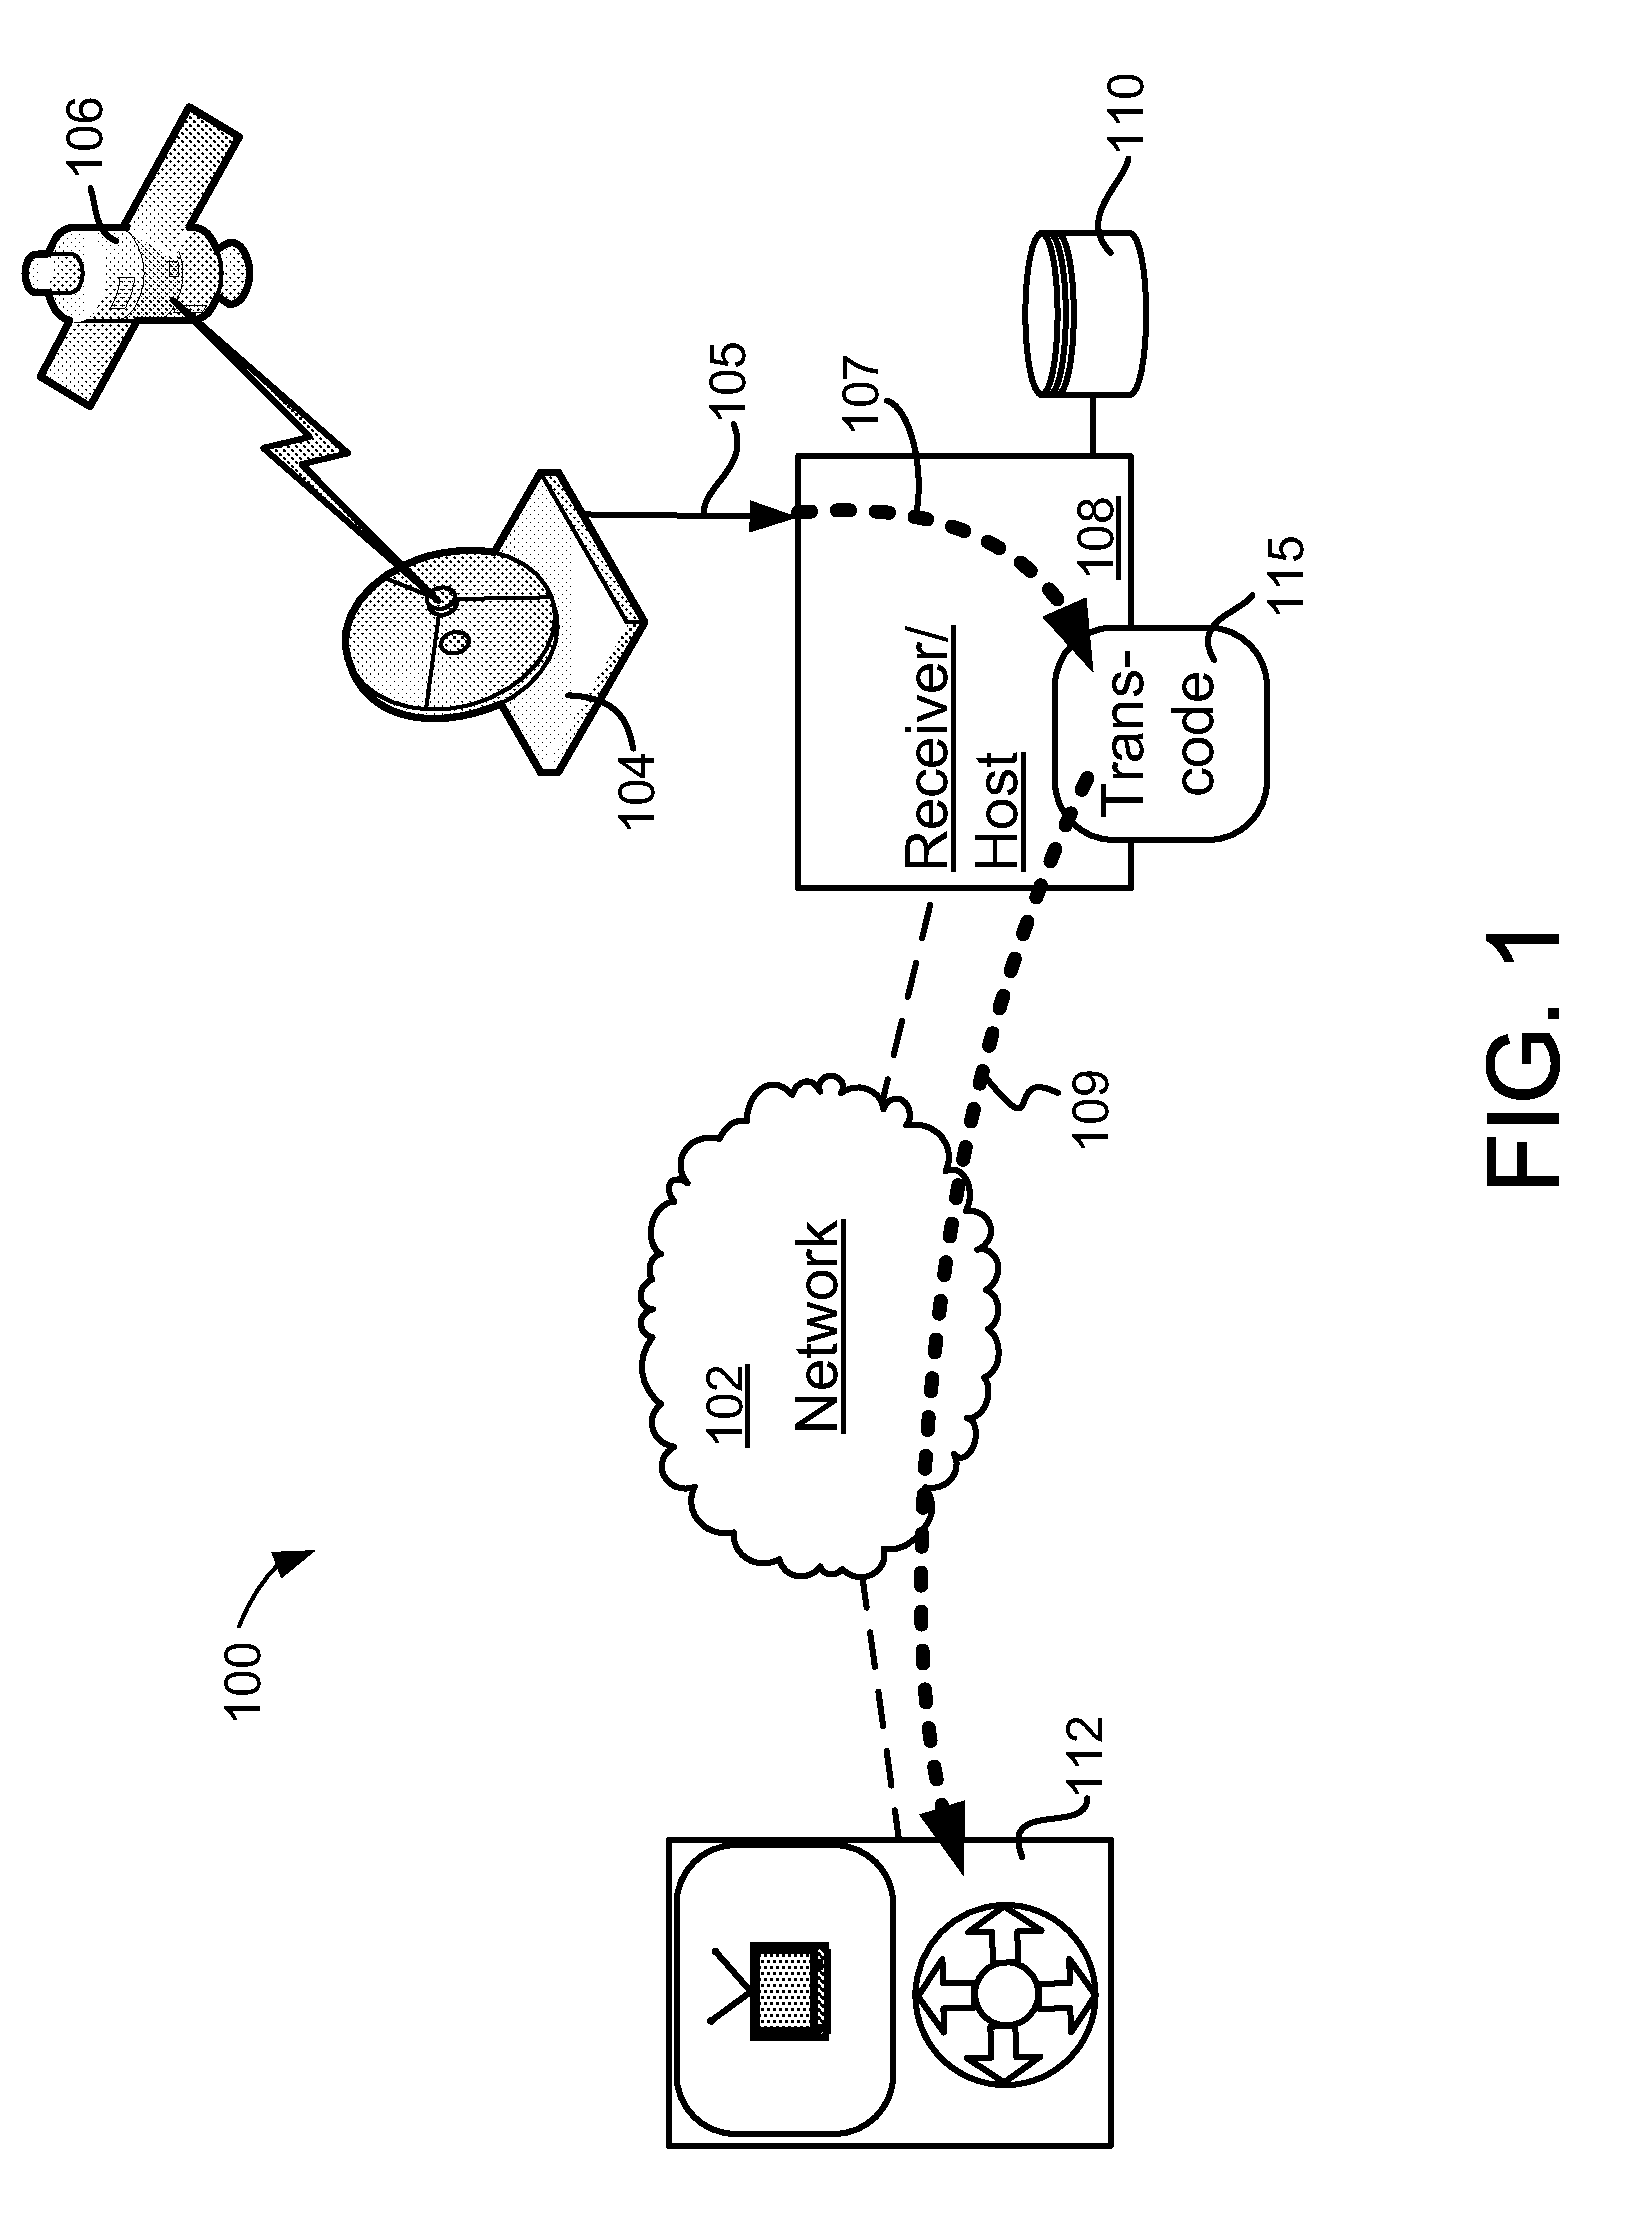 Systems and methods for transcoding and place shifting media content